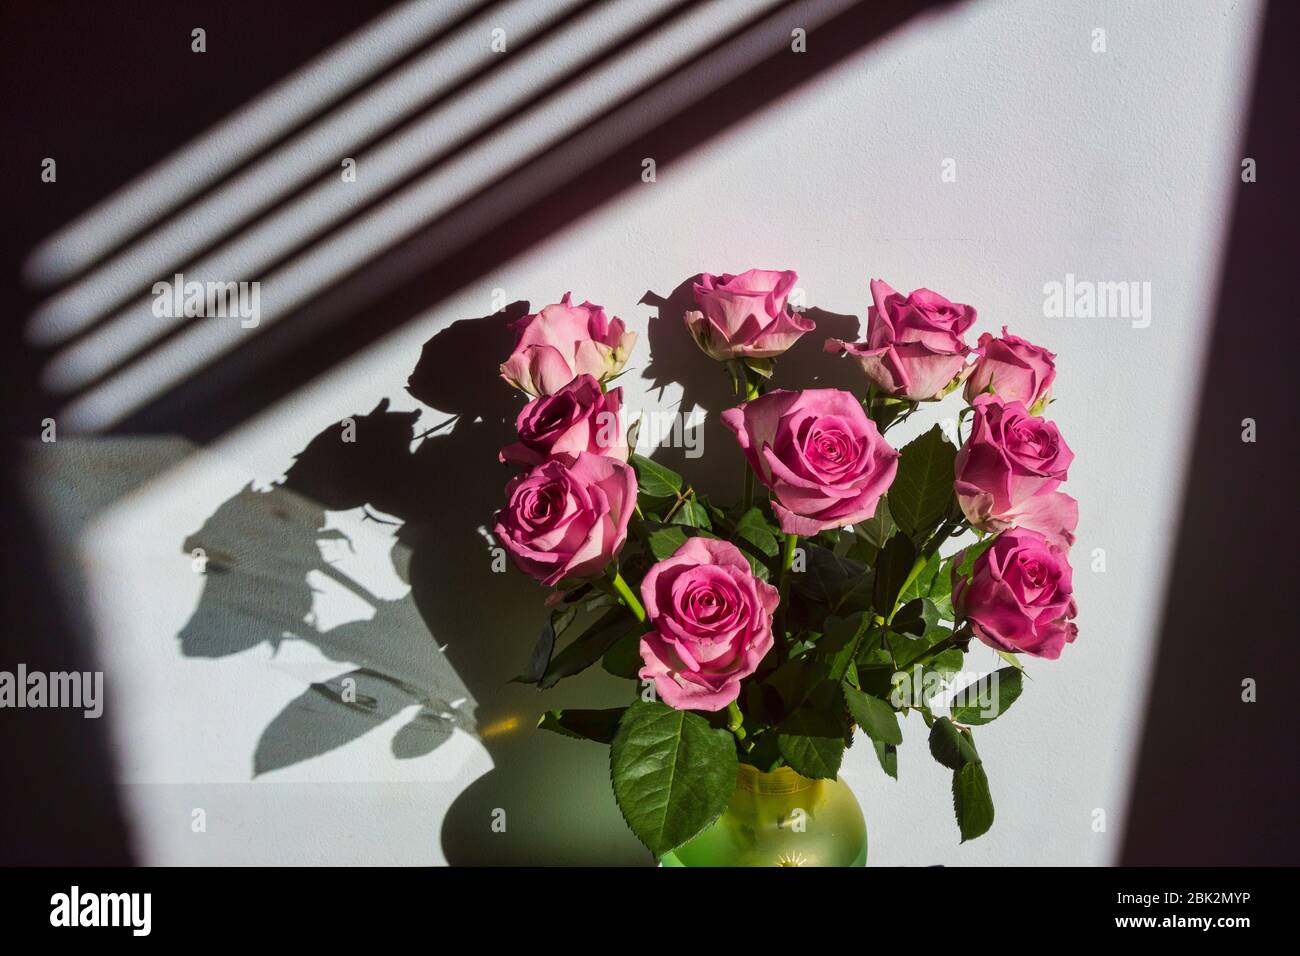 Roses and shadows, flower image. Brilliant colours. Conceptual. red,  shades, rose flower heads arrangement. Stock Photo